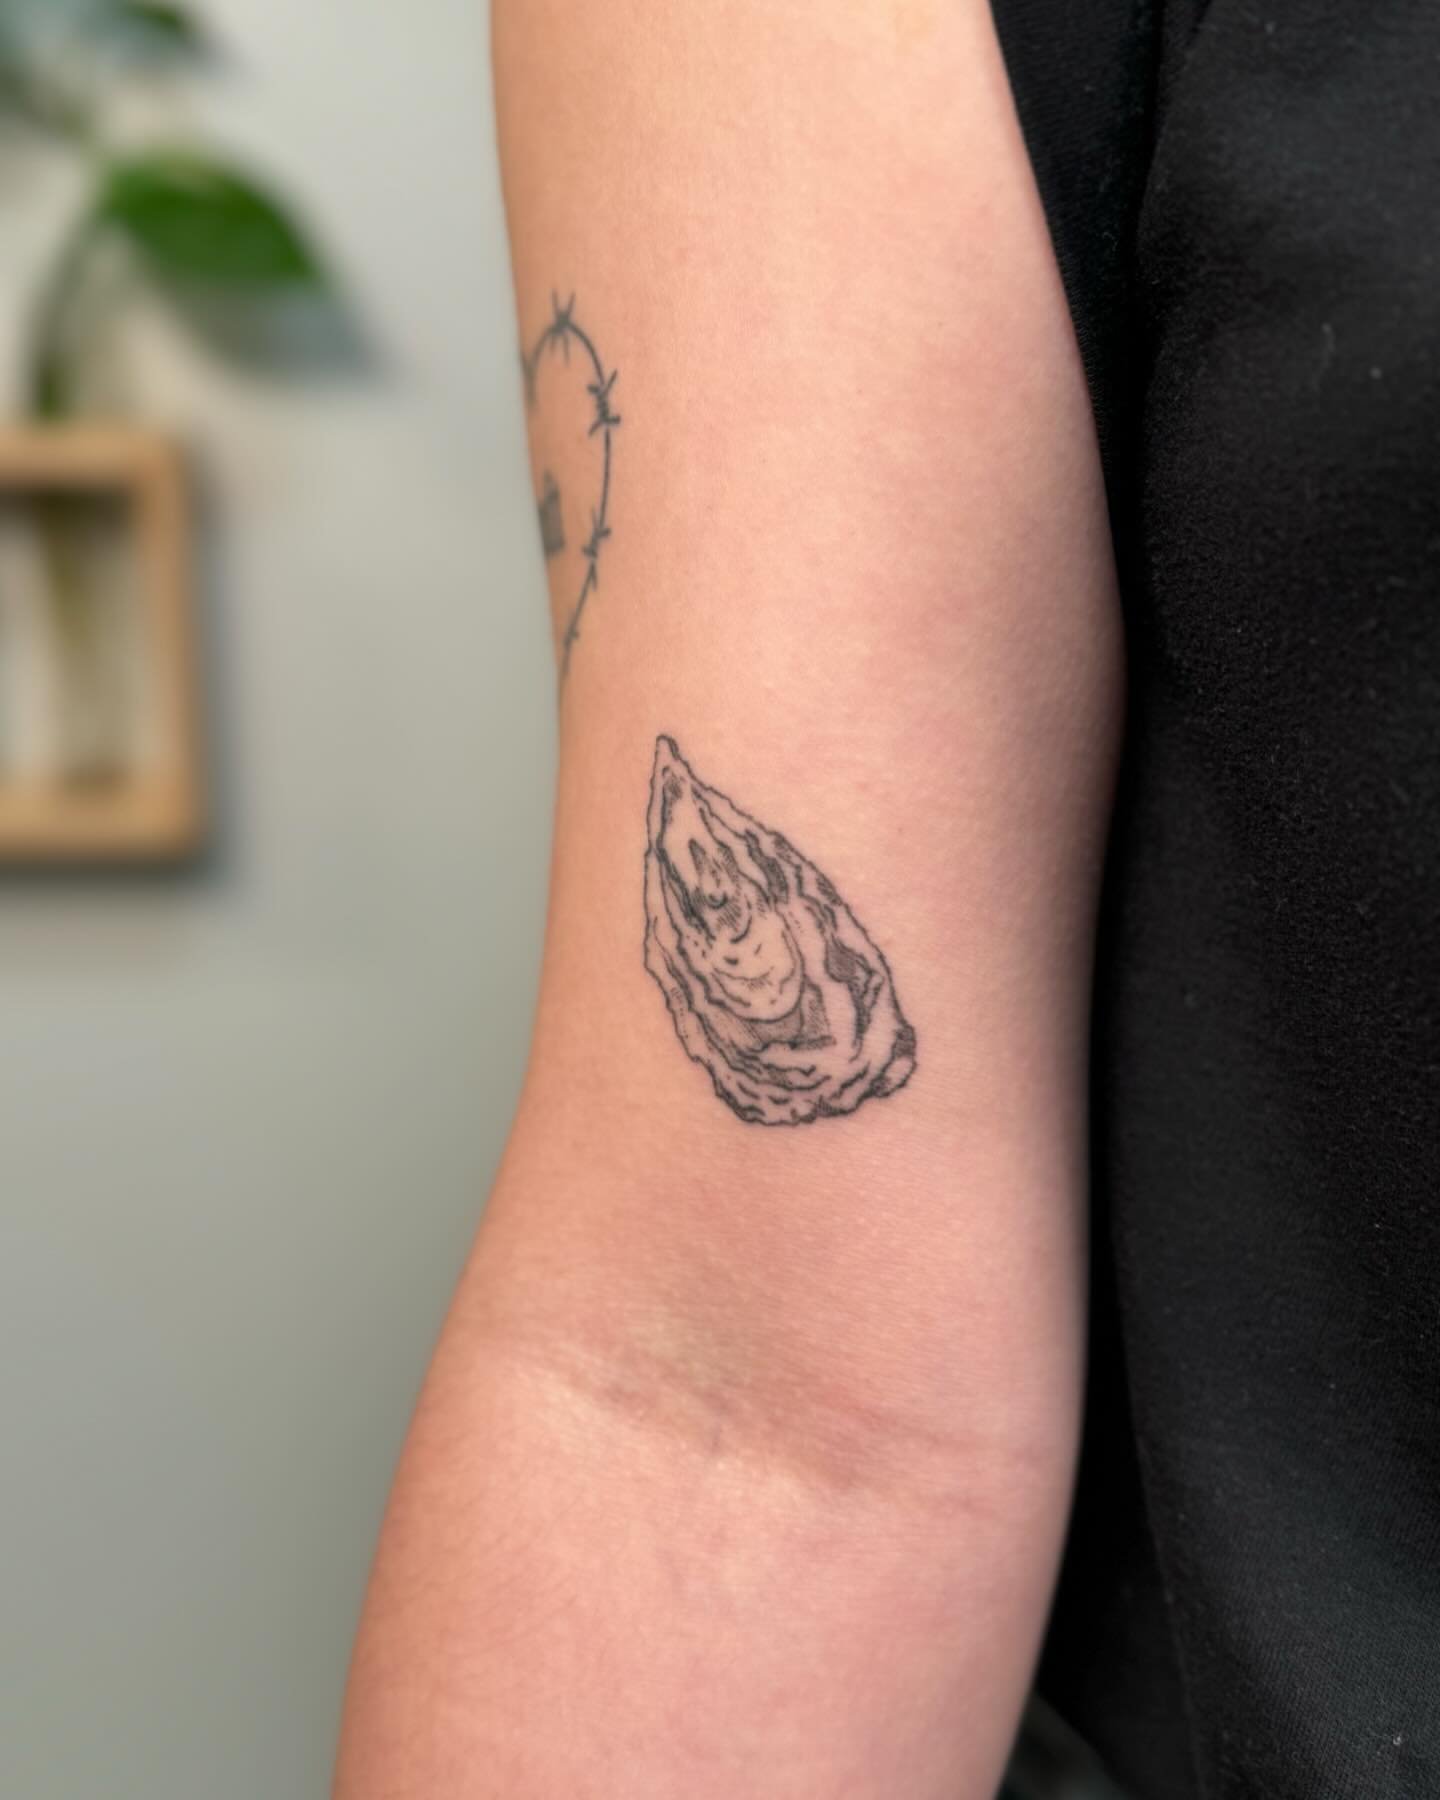 &bull; 5 months healed &bull; so happy to have this little oyster friend stopped by my studio today 🦪

#seattletattoo #northbendtattoo #snoqualmievalley #tattoosofinstagram #finelinetattoo #bellevuetattoo #tattoogirlies